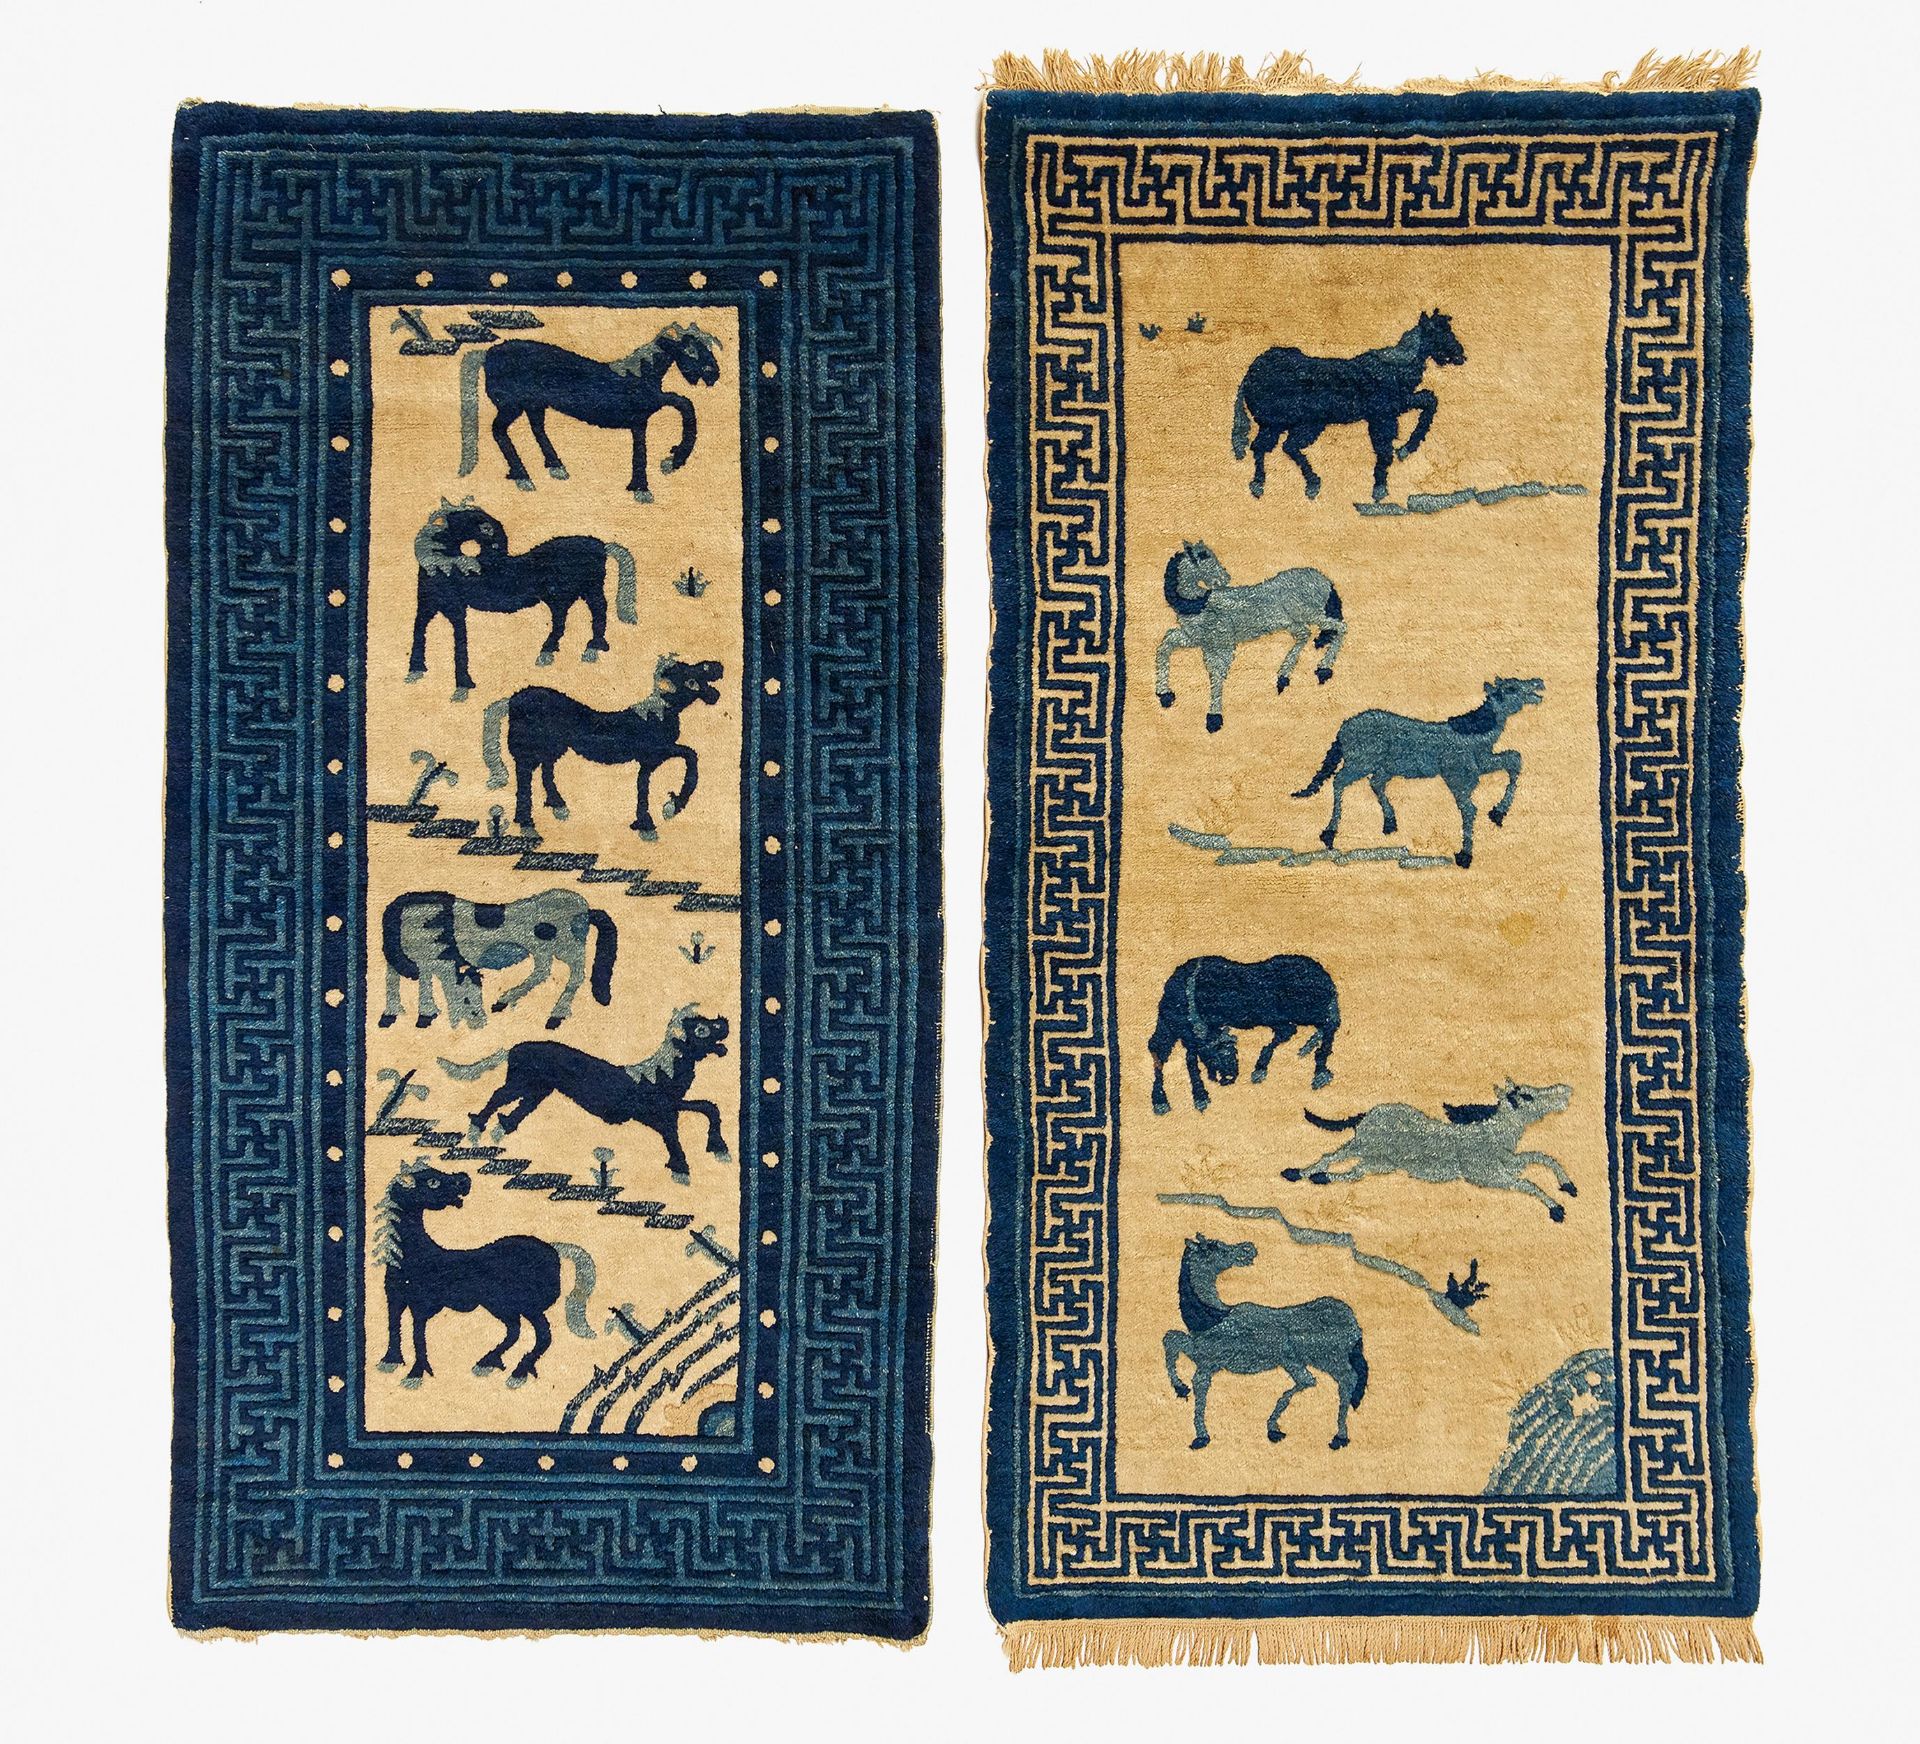 TWO CARPETS WITH EACH SIX HORSES. China. 19th-20th c. Wool, knotted. Each 120x60cm. Condition B.